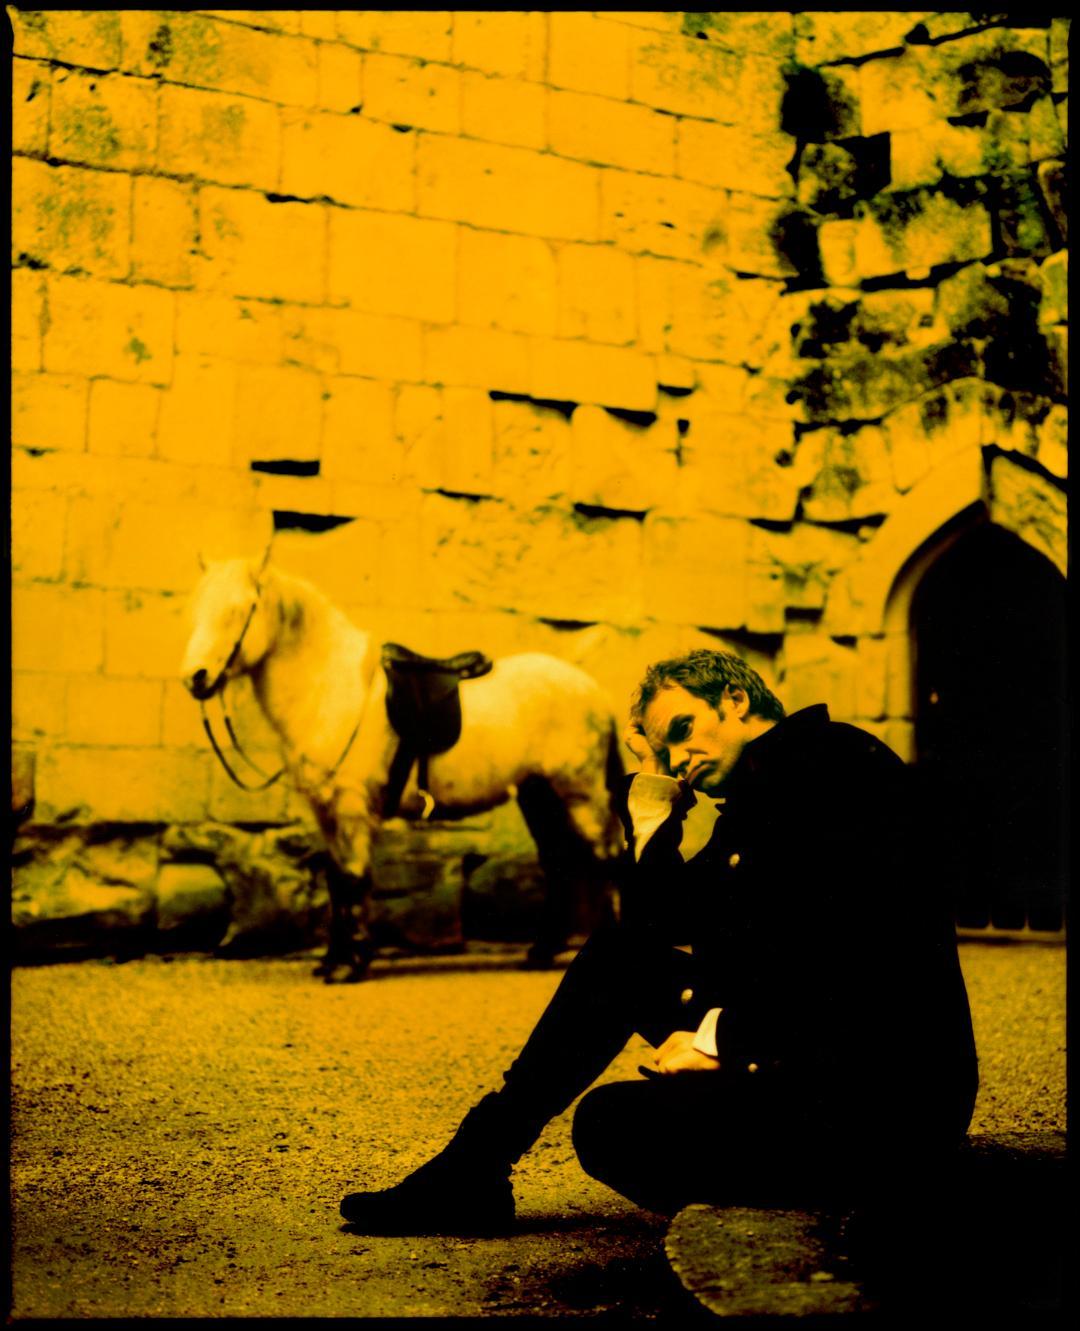 Sting 

Sting’s album cover photograph for “Ten Summoners Tales”

1992

by Kevin Westenberg
Signed Limited Edition

Kevin Westenberg is famed for his creation of provocative and electrifying images of world-class musicians, artists and movie stars